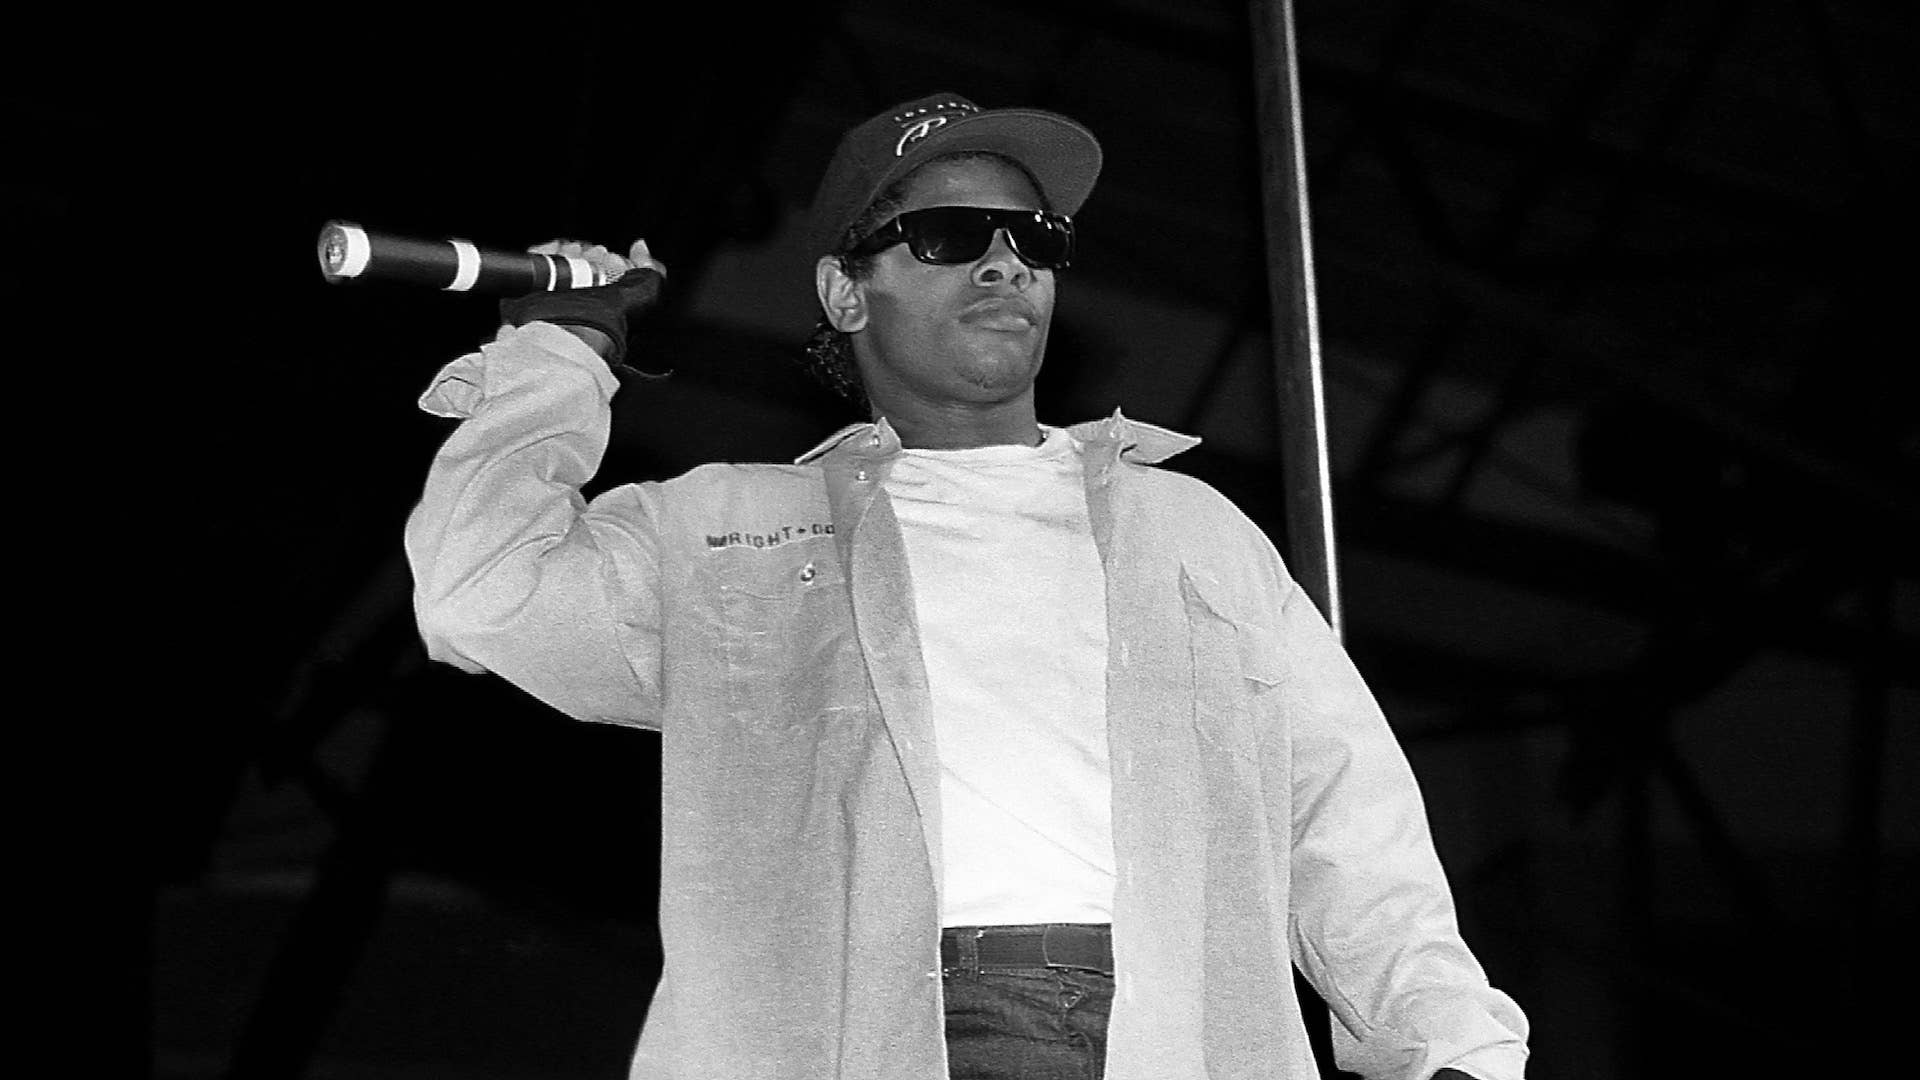 Who Are Eazy-E's Kids? The N.W.A. Rapper Has 11 Children